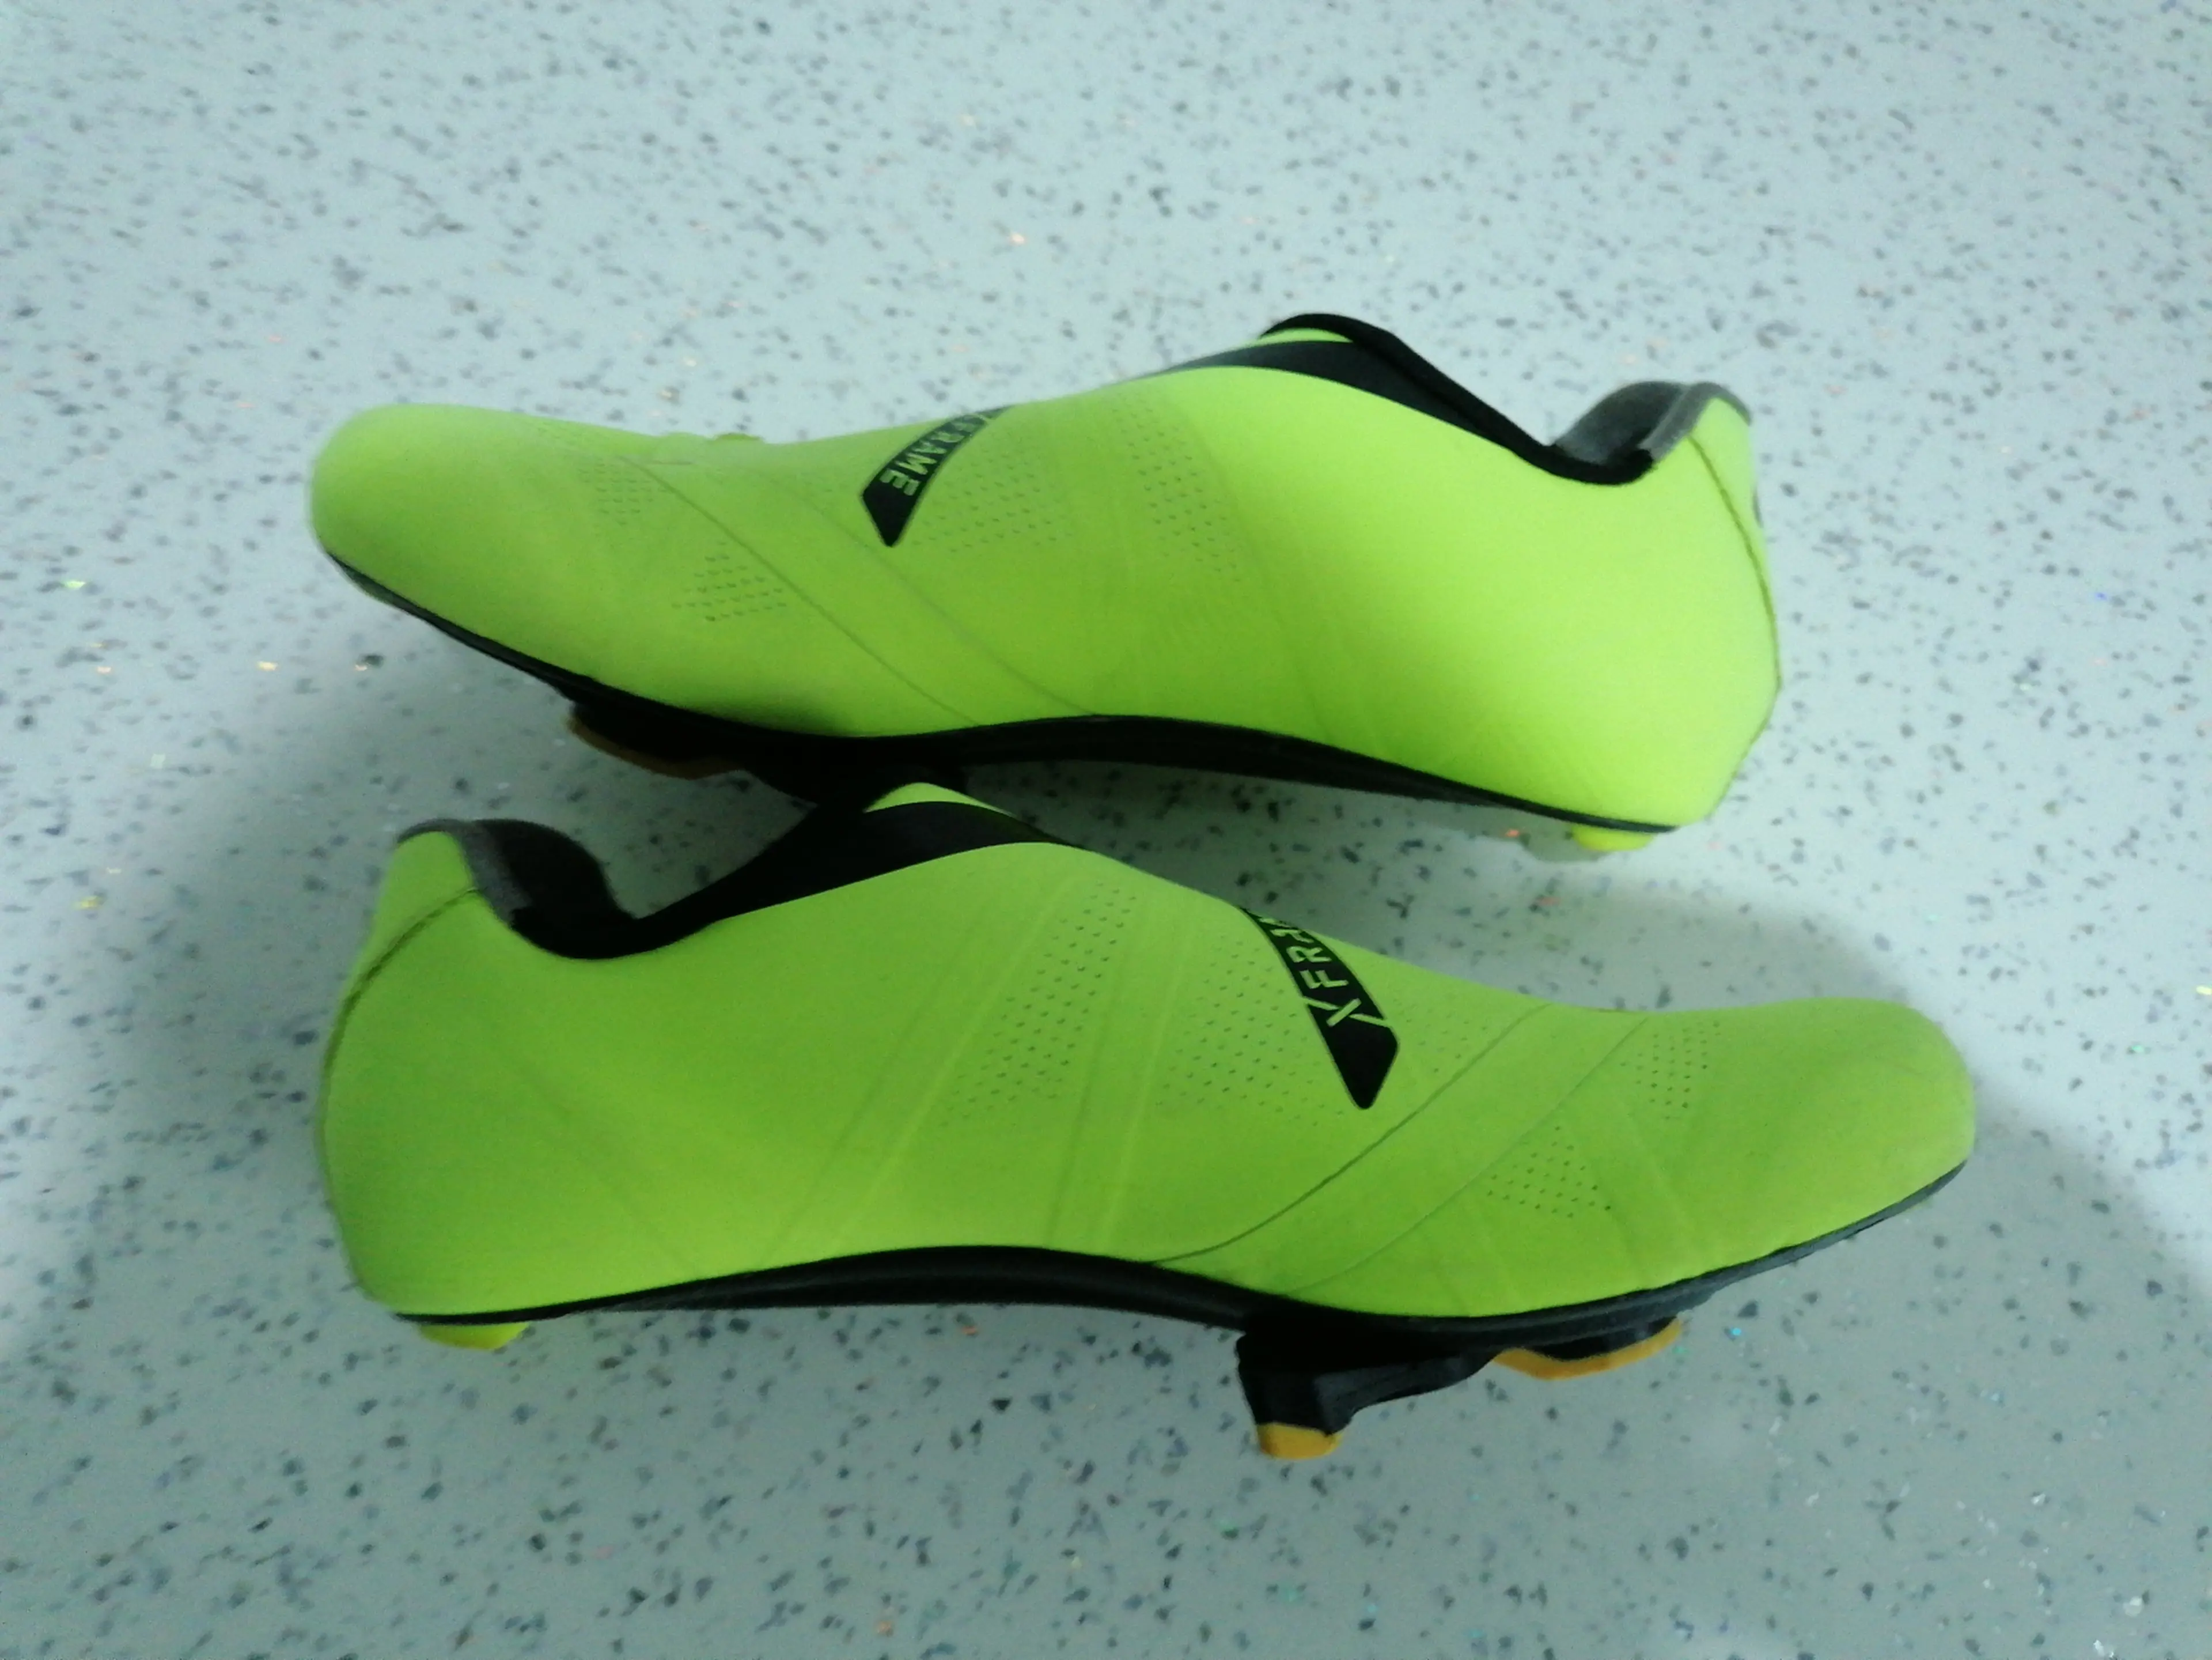 2. Northwave Extreme RR size 42